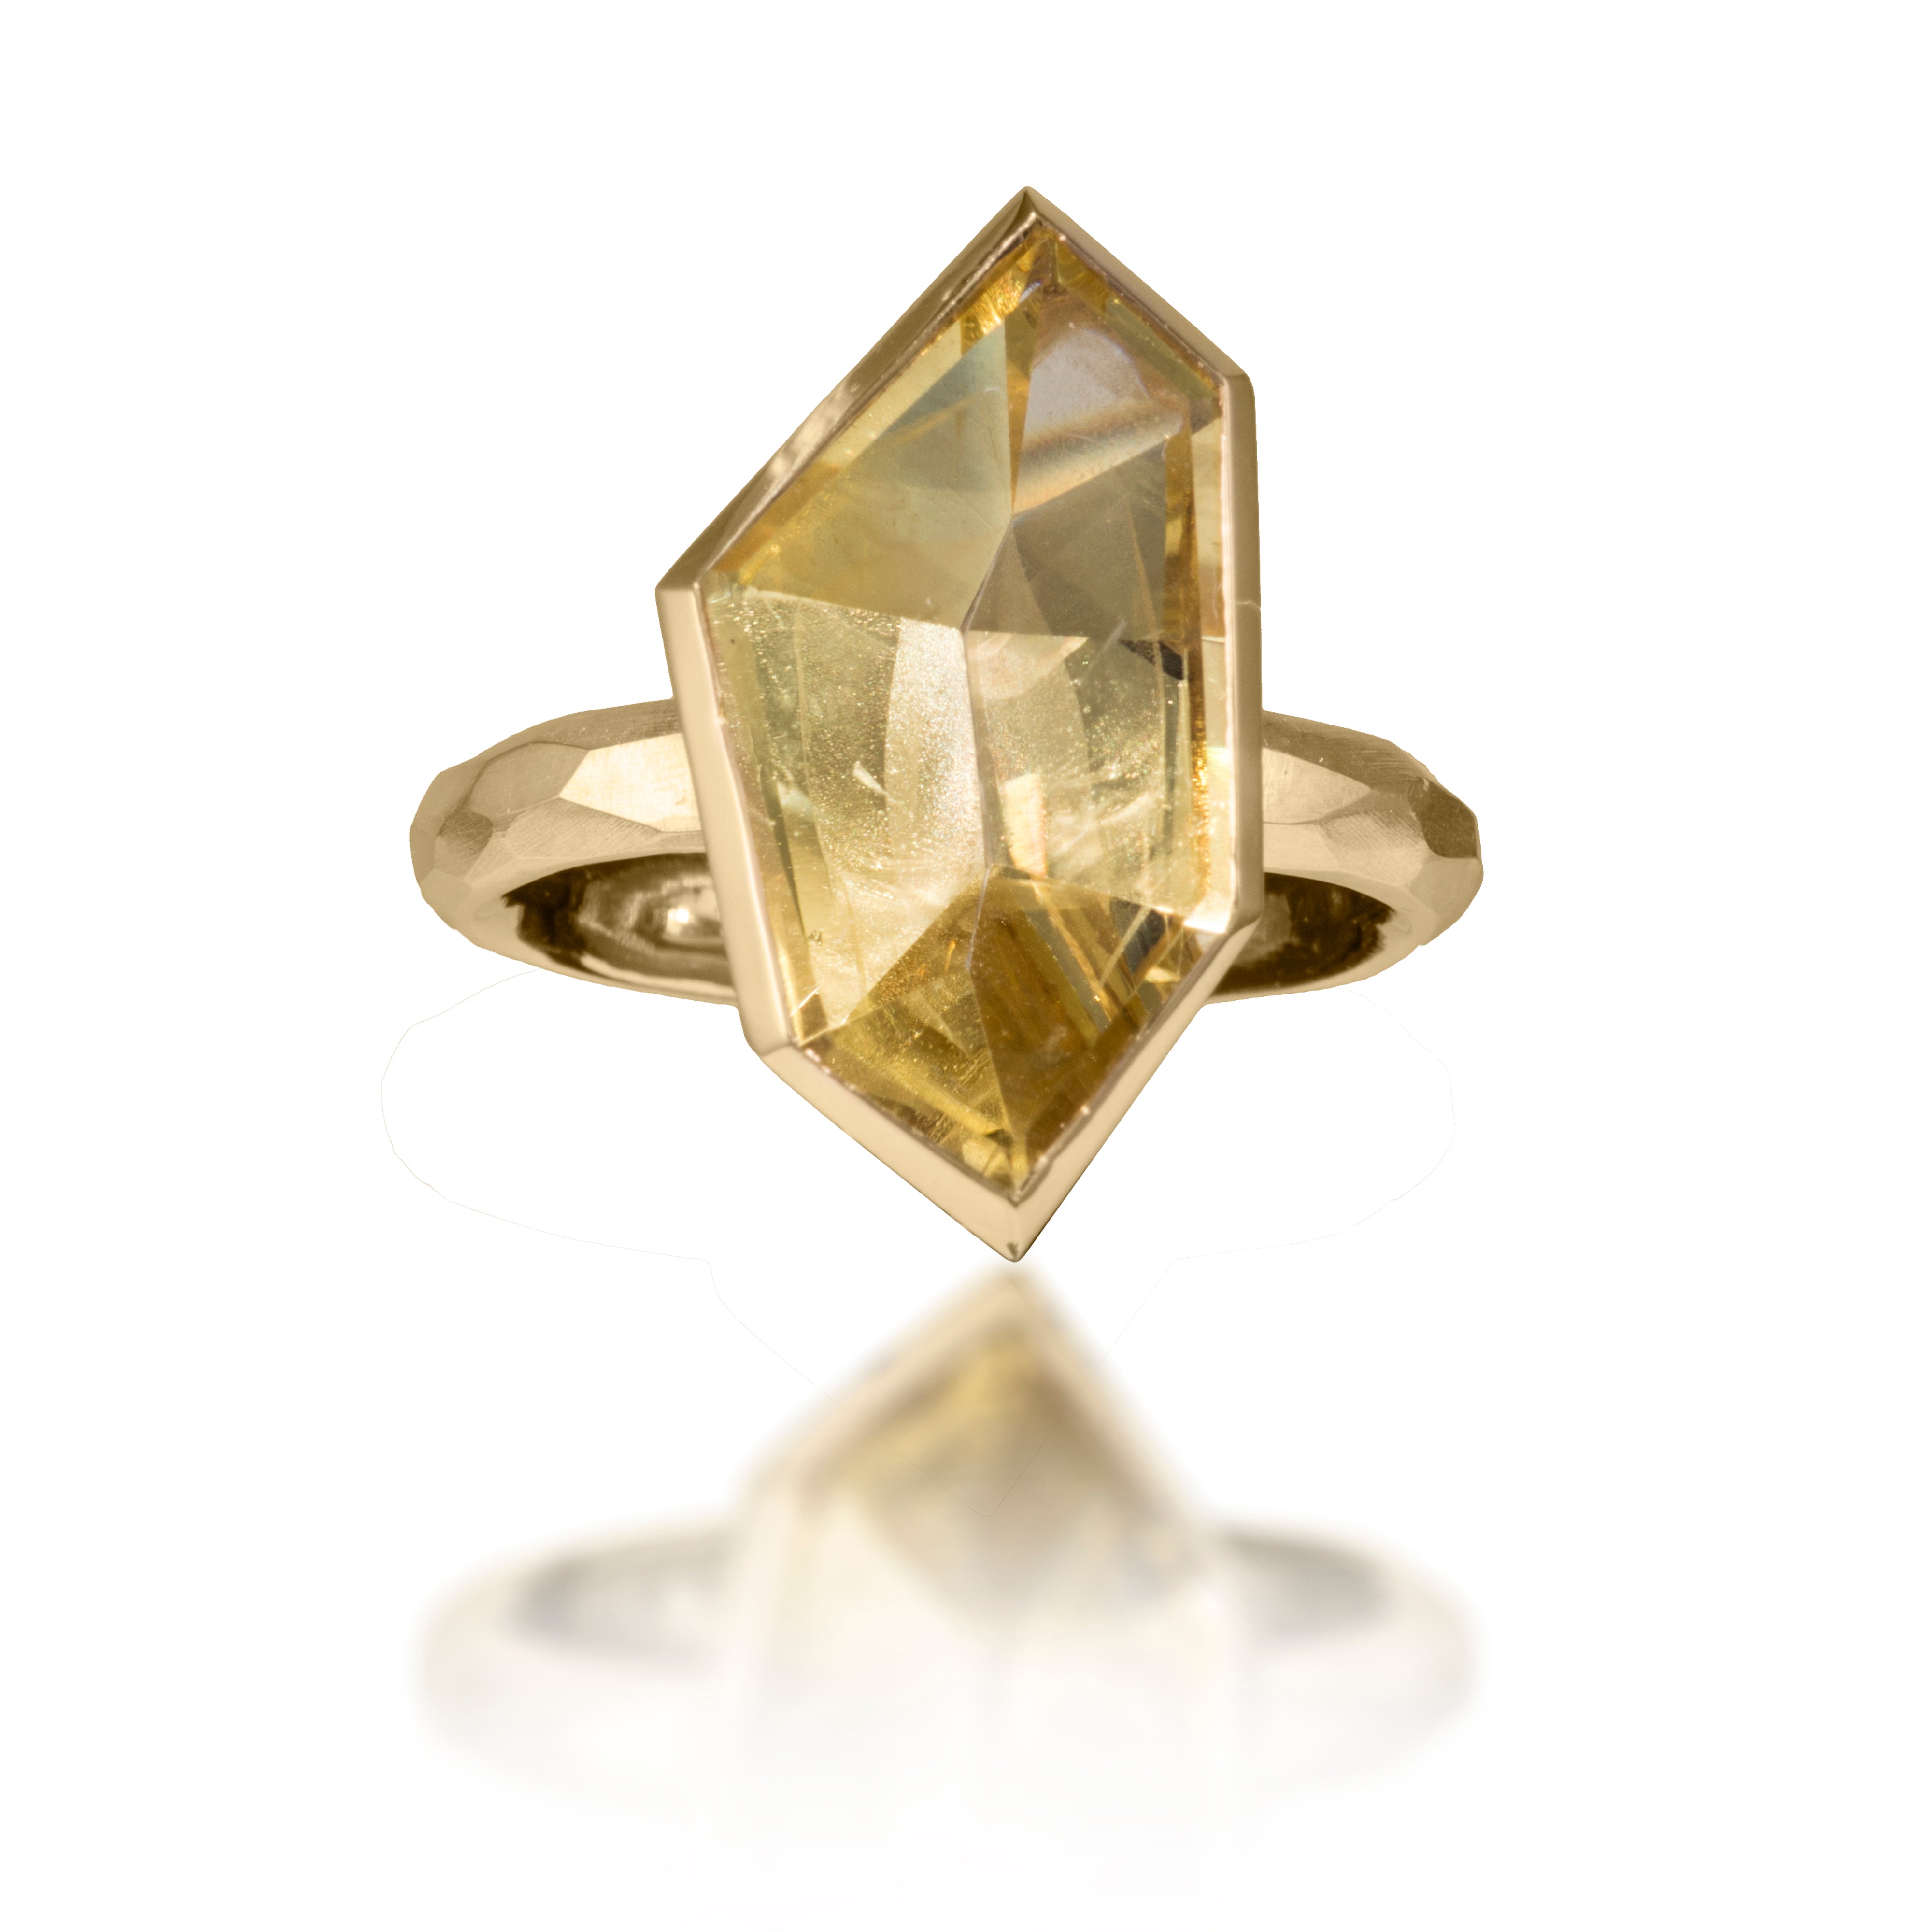 Facets one of a kind ring in 18k gold, set with mirror cut golden beryl. Hand fabricated, carved, faceted, textured. Beryl total carat weight, 4.57.